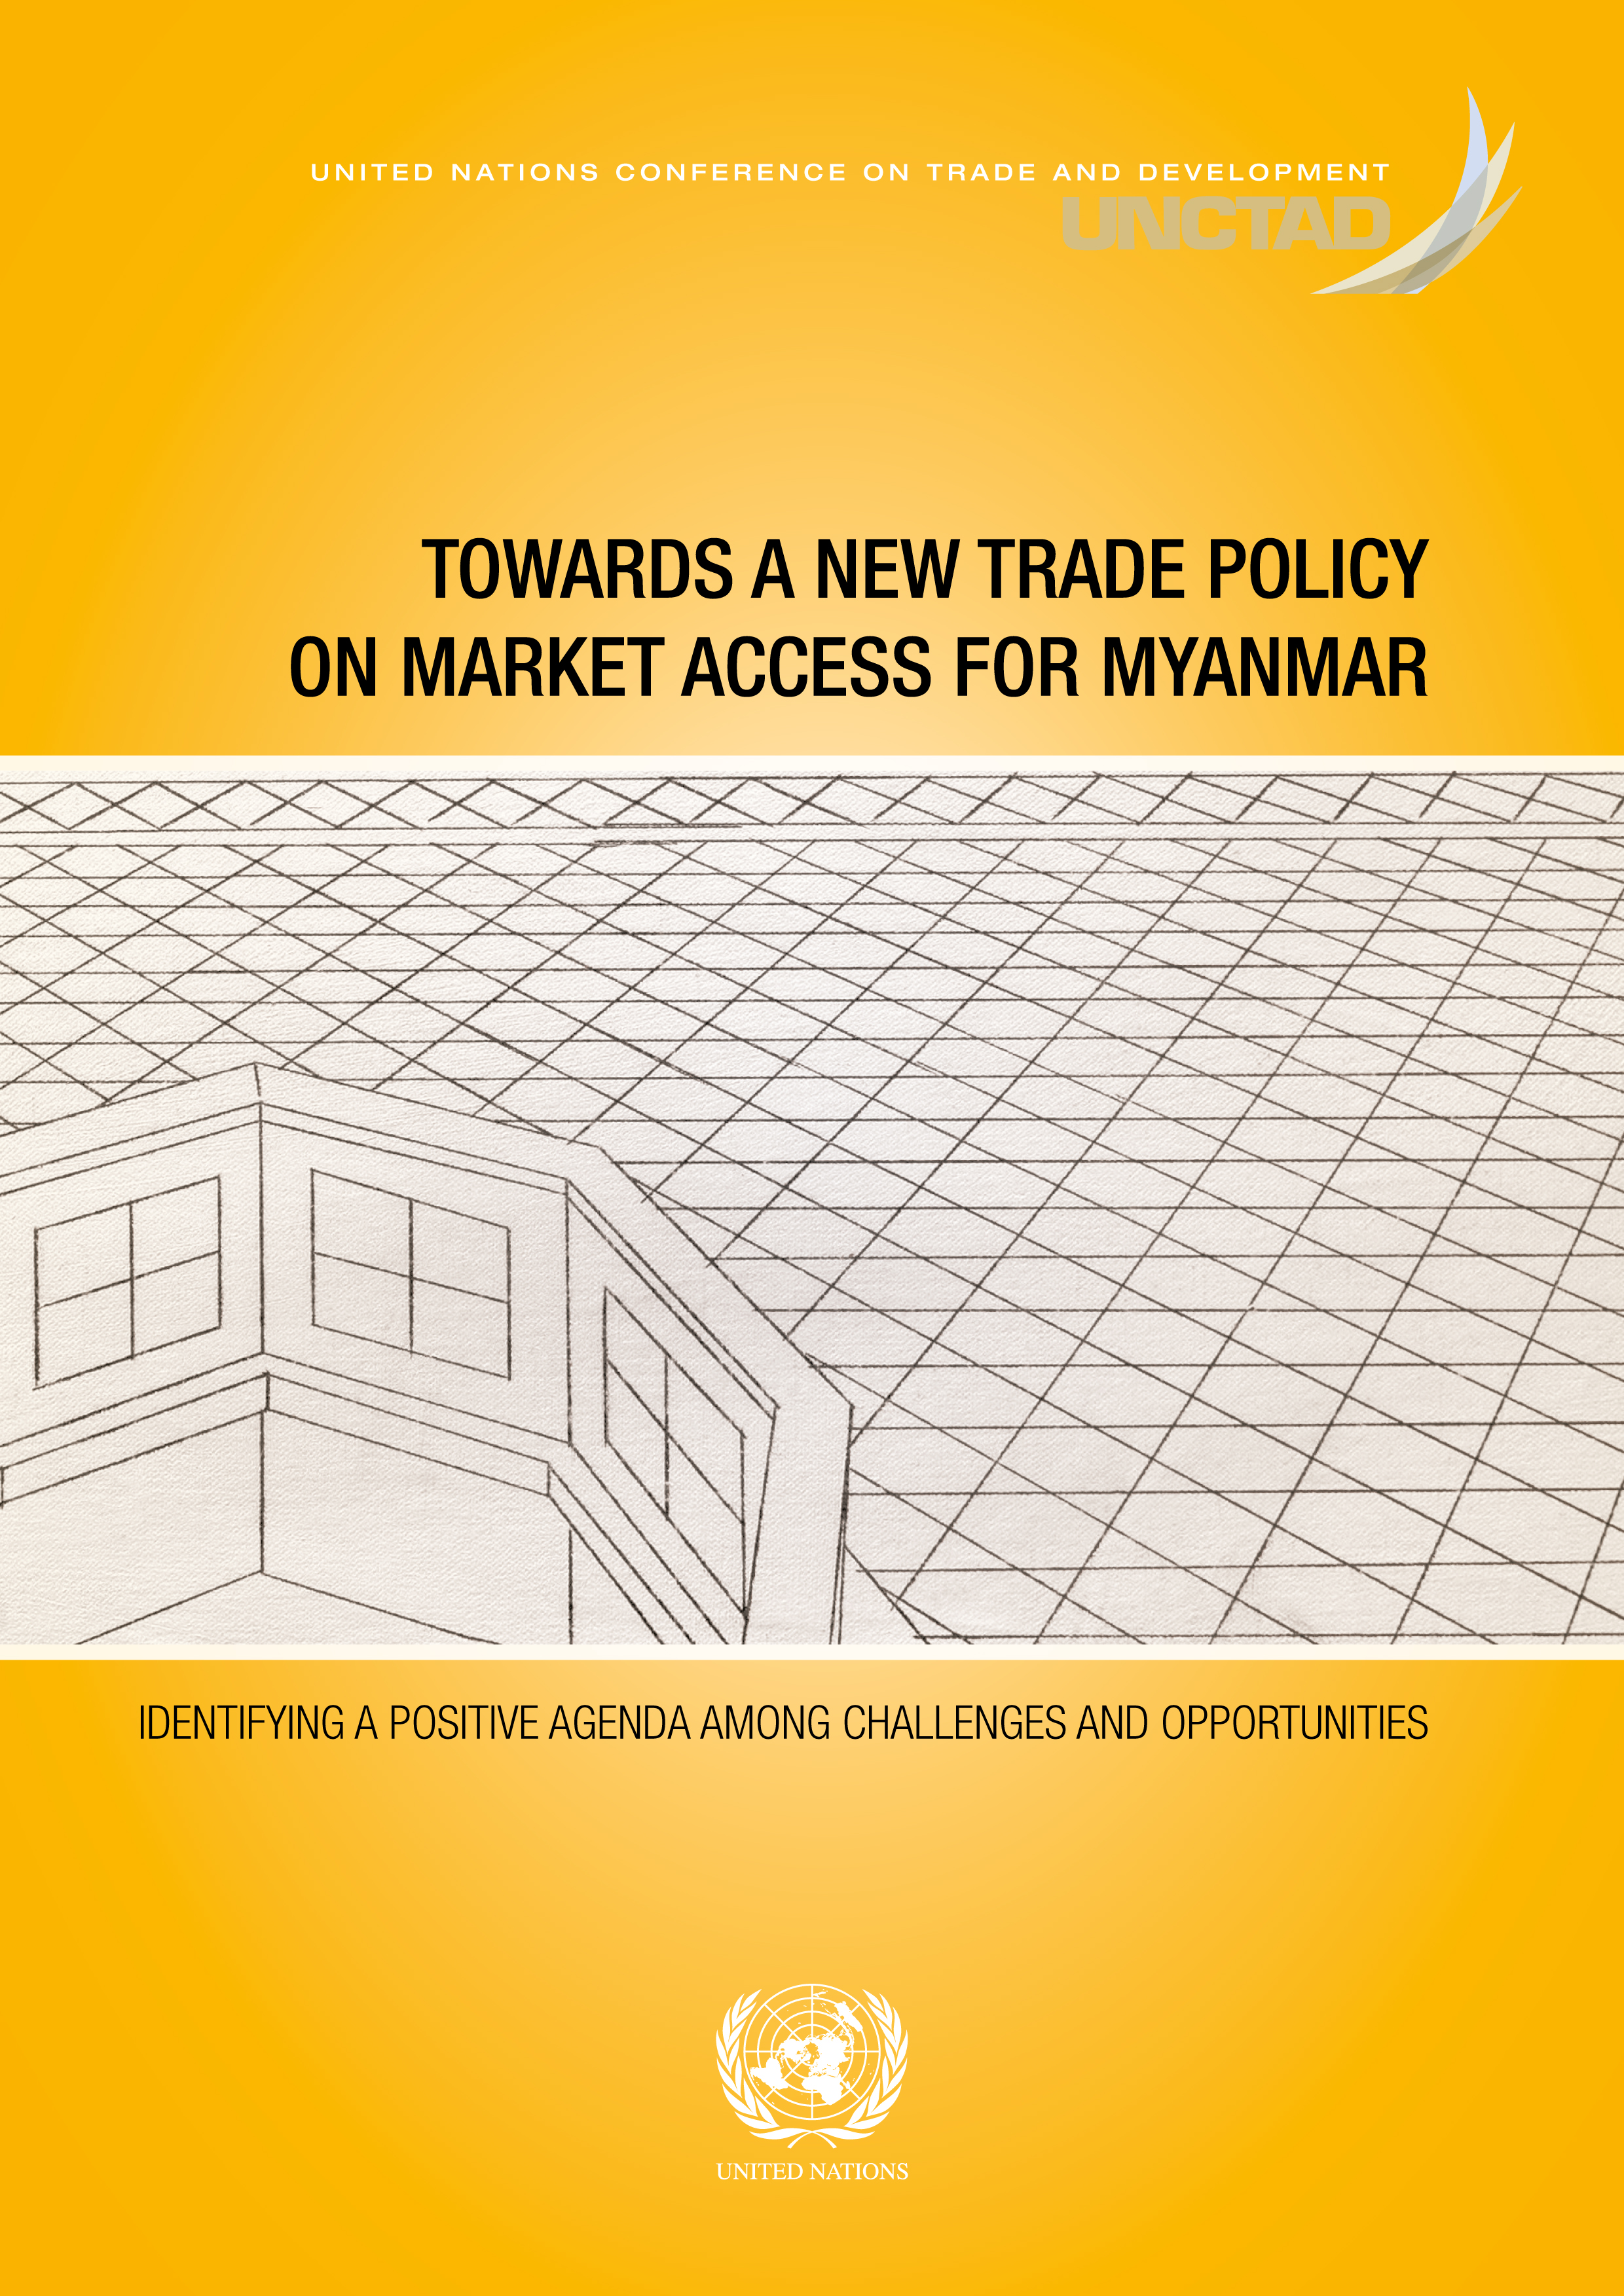 image of Myanmar and the emerging trade challenges – The erosion and loss of preferential market access and rules of origin and the quest for alternatives